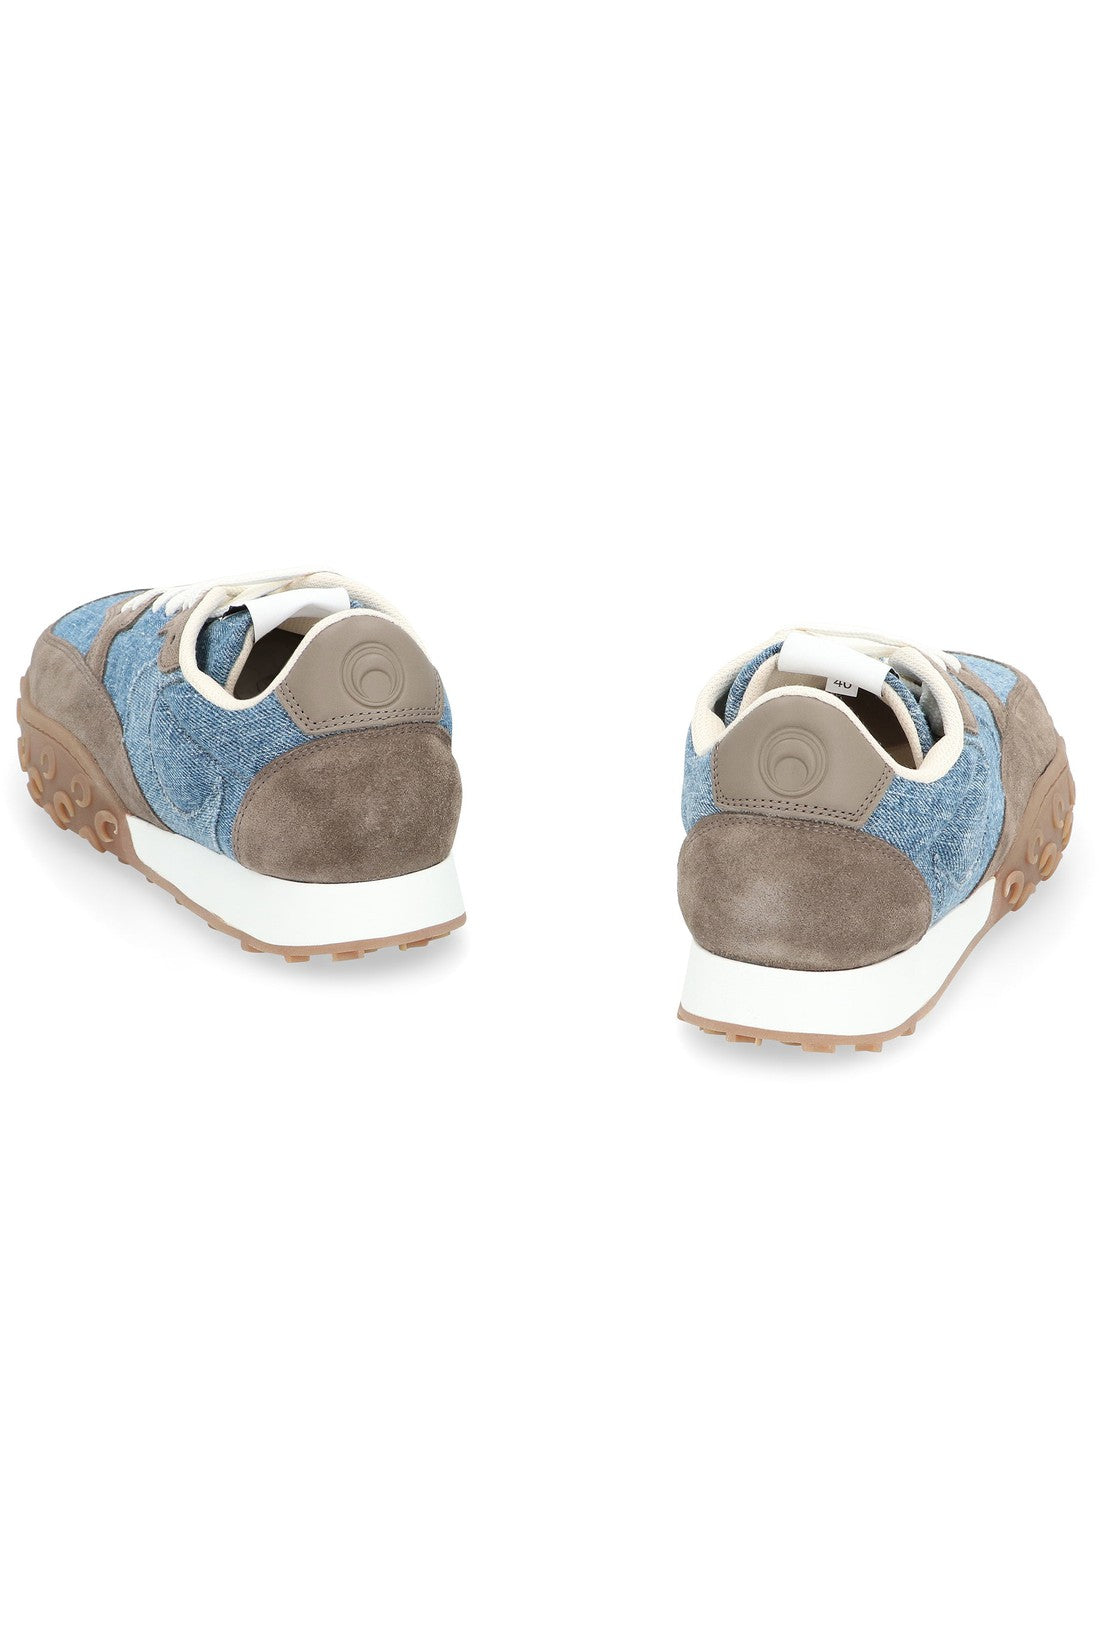 Marine Serre-OUTLET-SALE-Ms-Rise low-top sneakers-ARCHIVIST